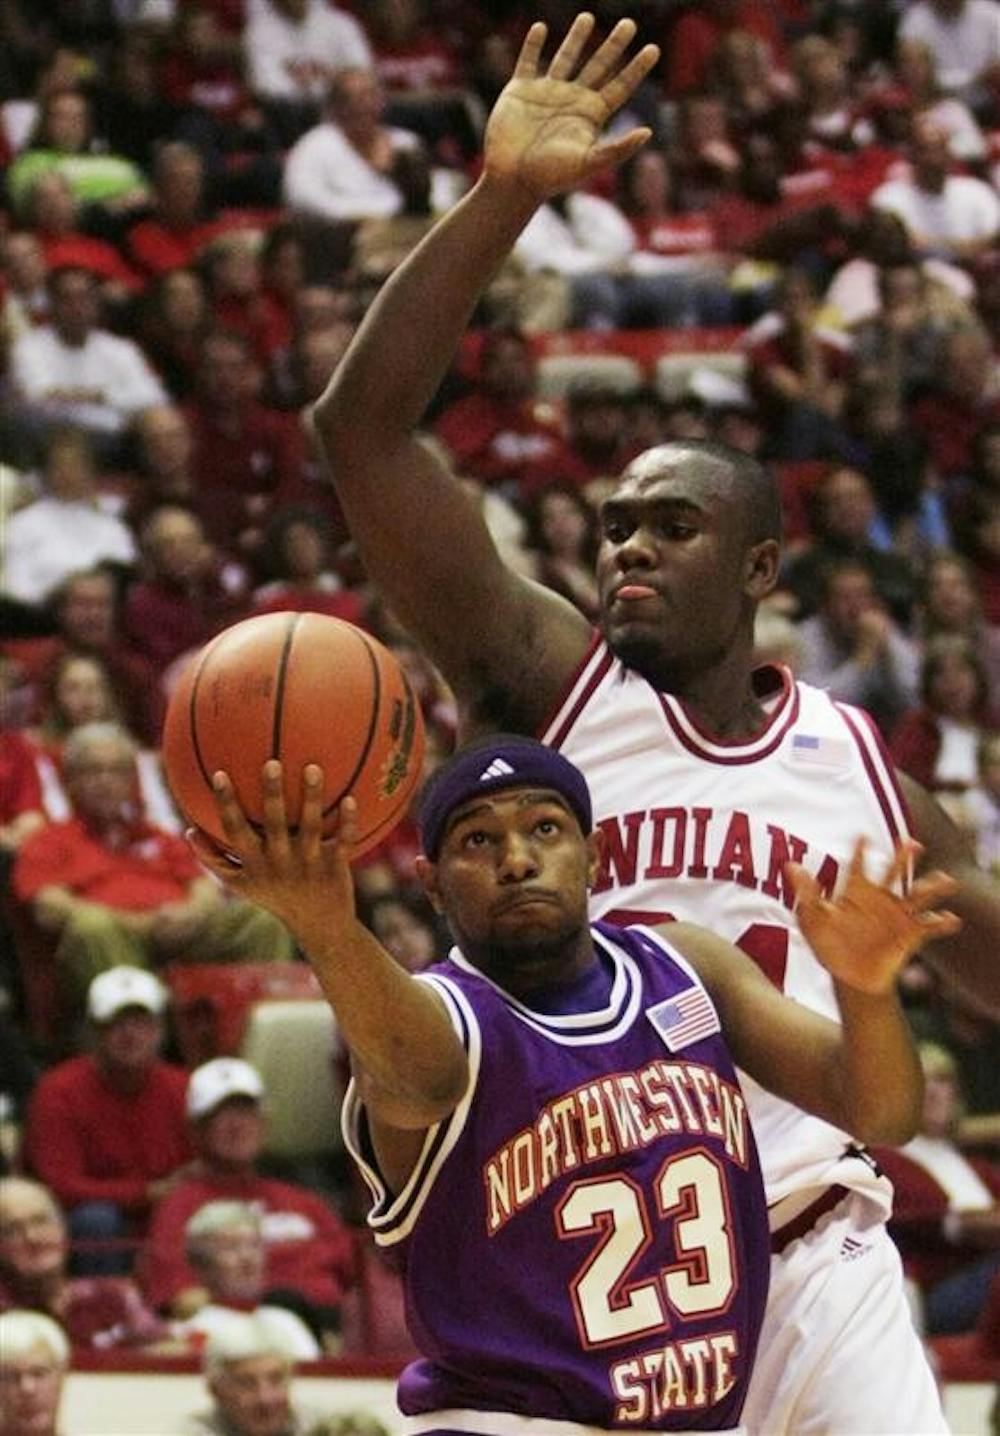 Freshman guard Malik Story attempts to block a shot from Northwestern State's Keithan Hanckock during IU's 83-65 win Saturday at Assembly Hall. IU will face IU-Purdue University Indianapolis at 7 p.m. today at Assembly Hall.